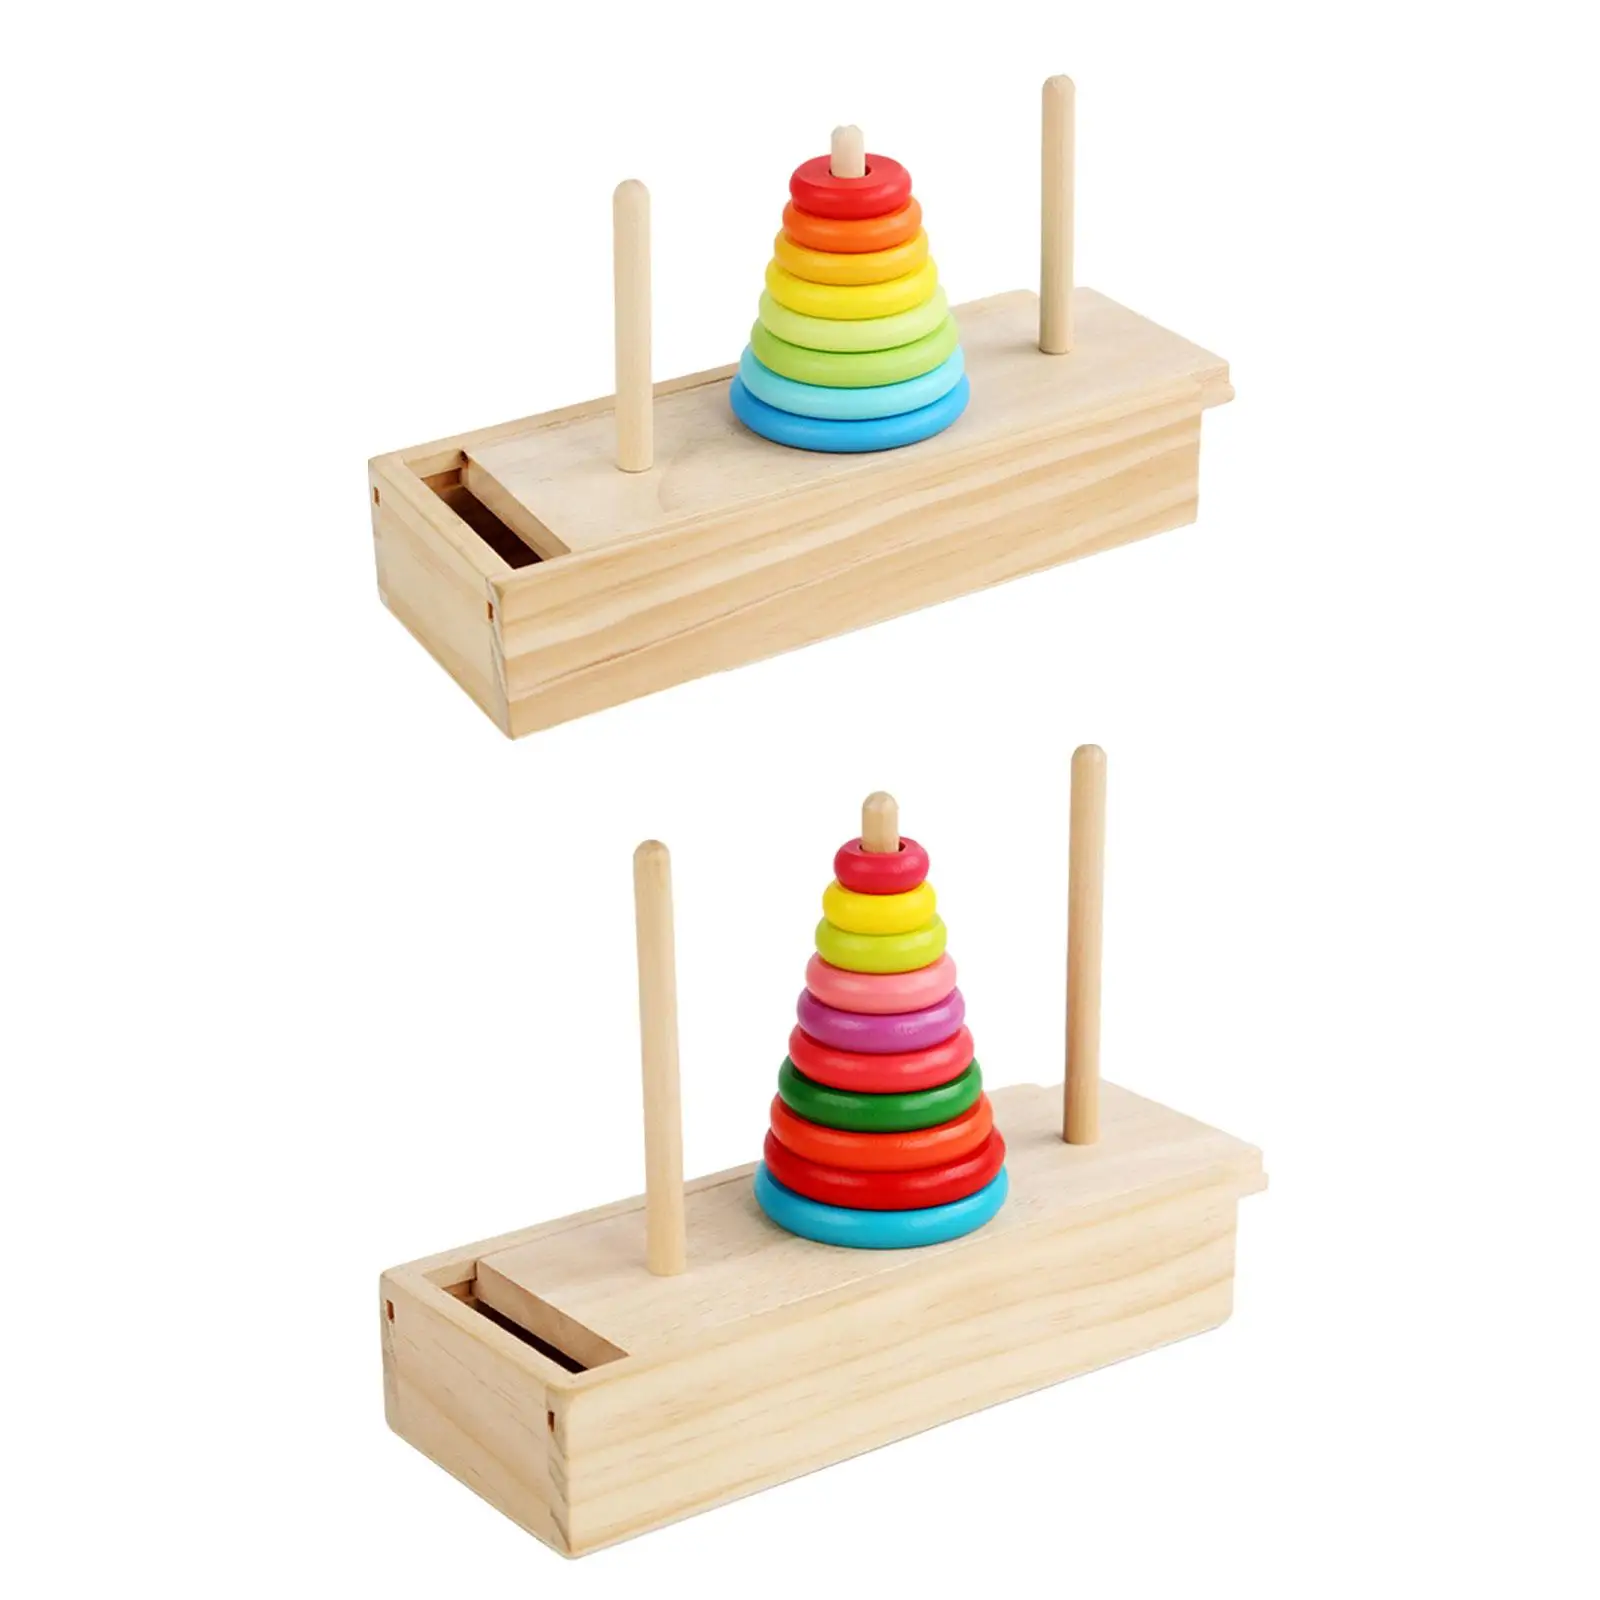 Wooden Stacking Tower Mathematical Game Color Cognition Puzzle Toy with Wooden Box Rainbow Color Stack Sorting Toy for Children